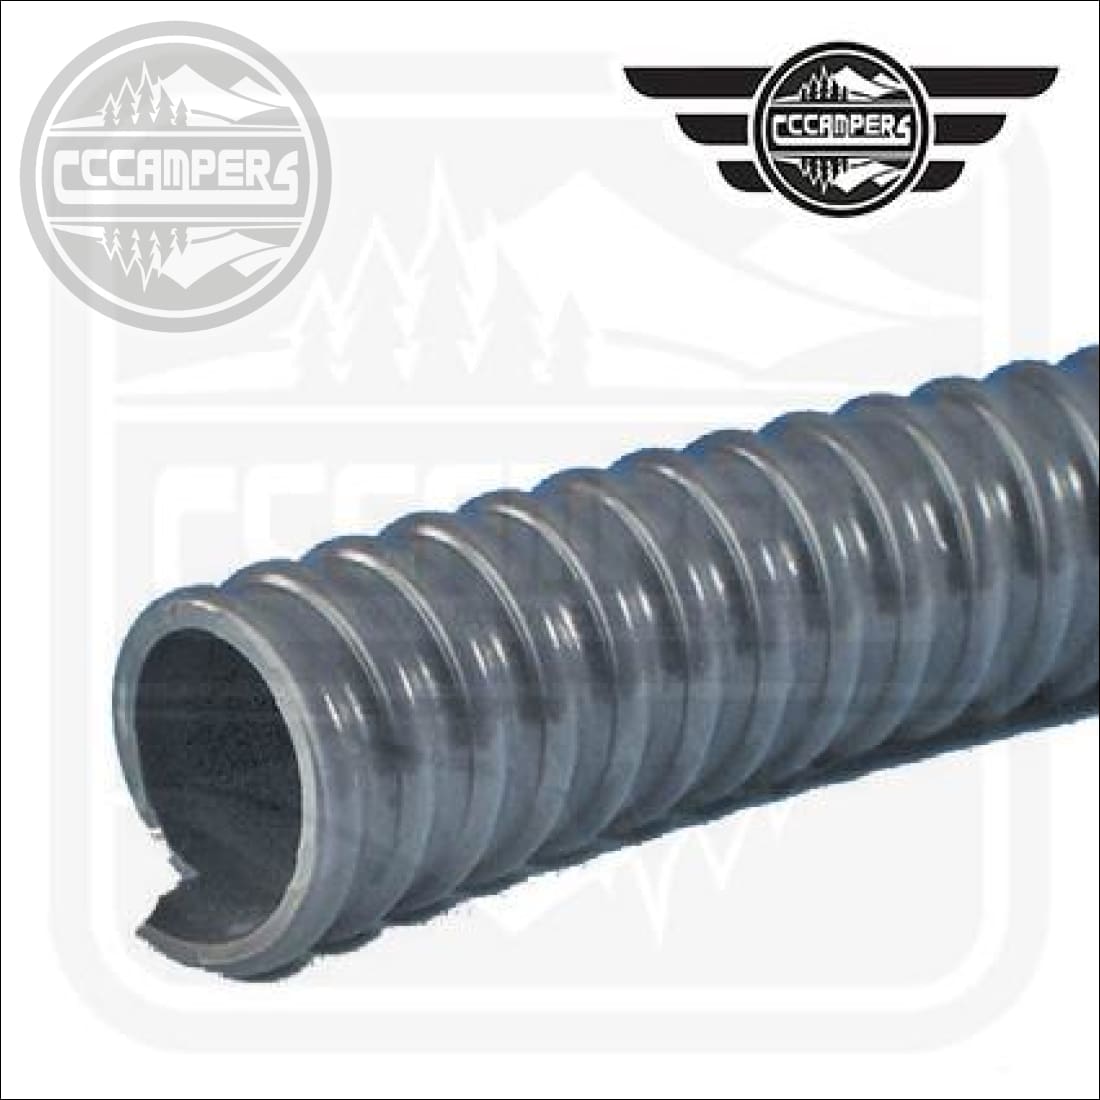 PVC Convoluted Hose Price is per metre - cccampers.myshopify.com